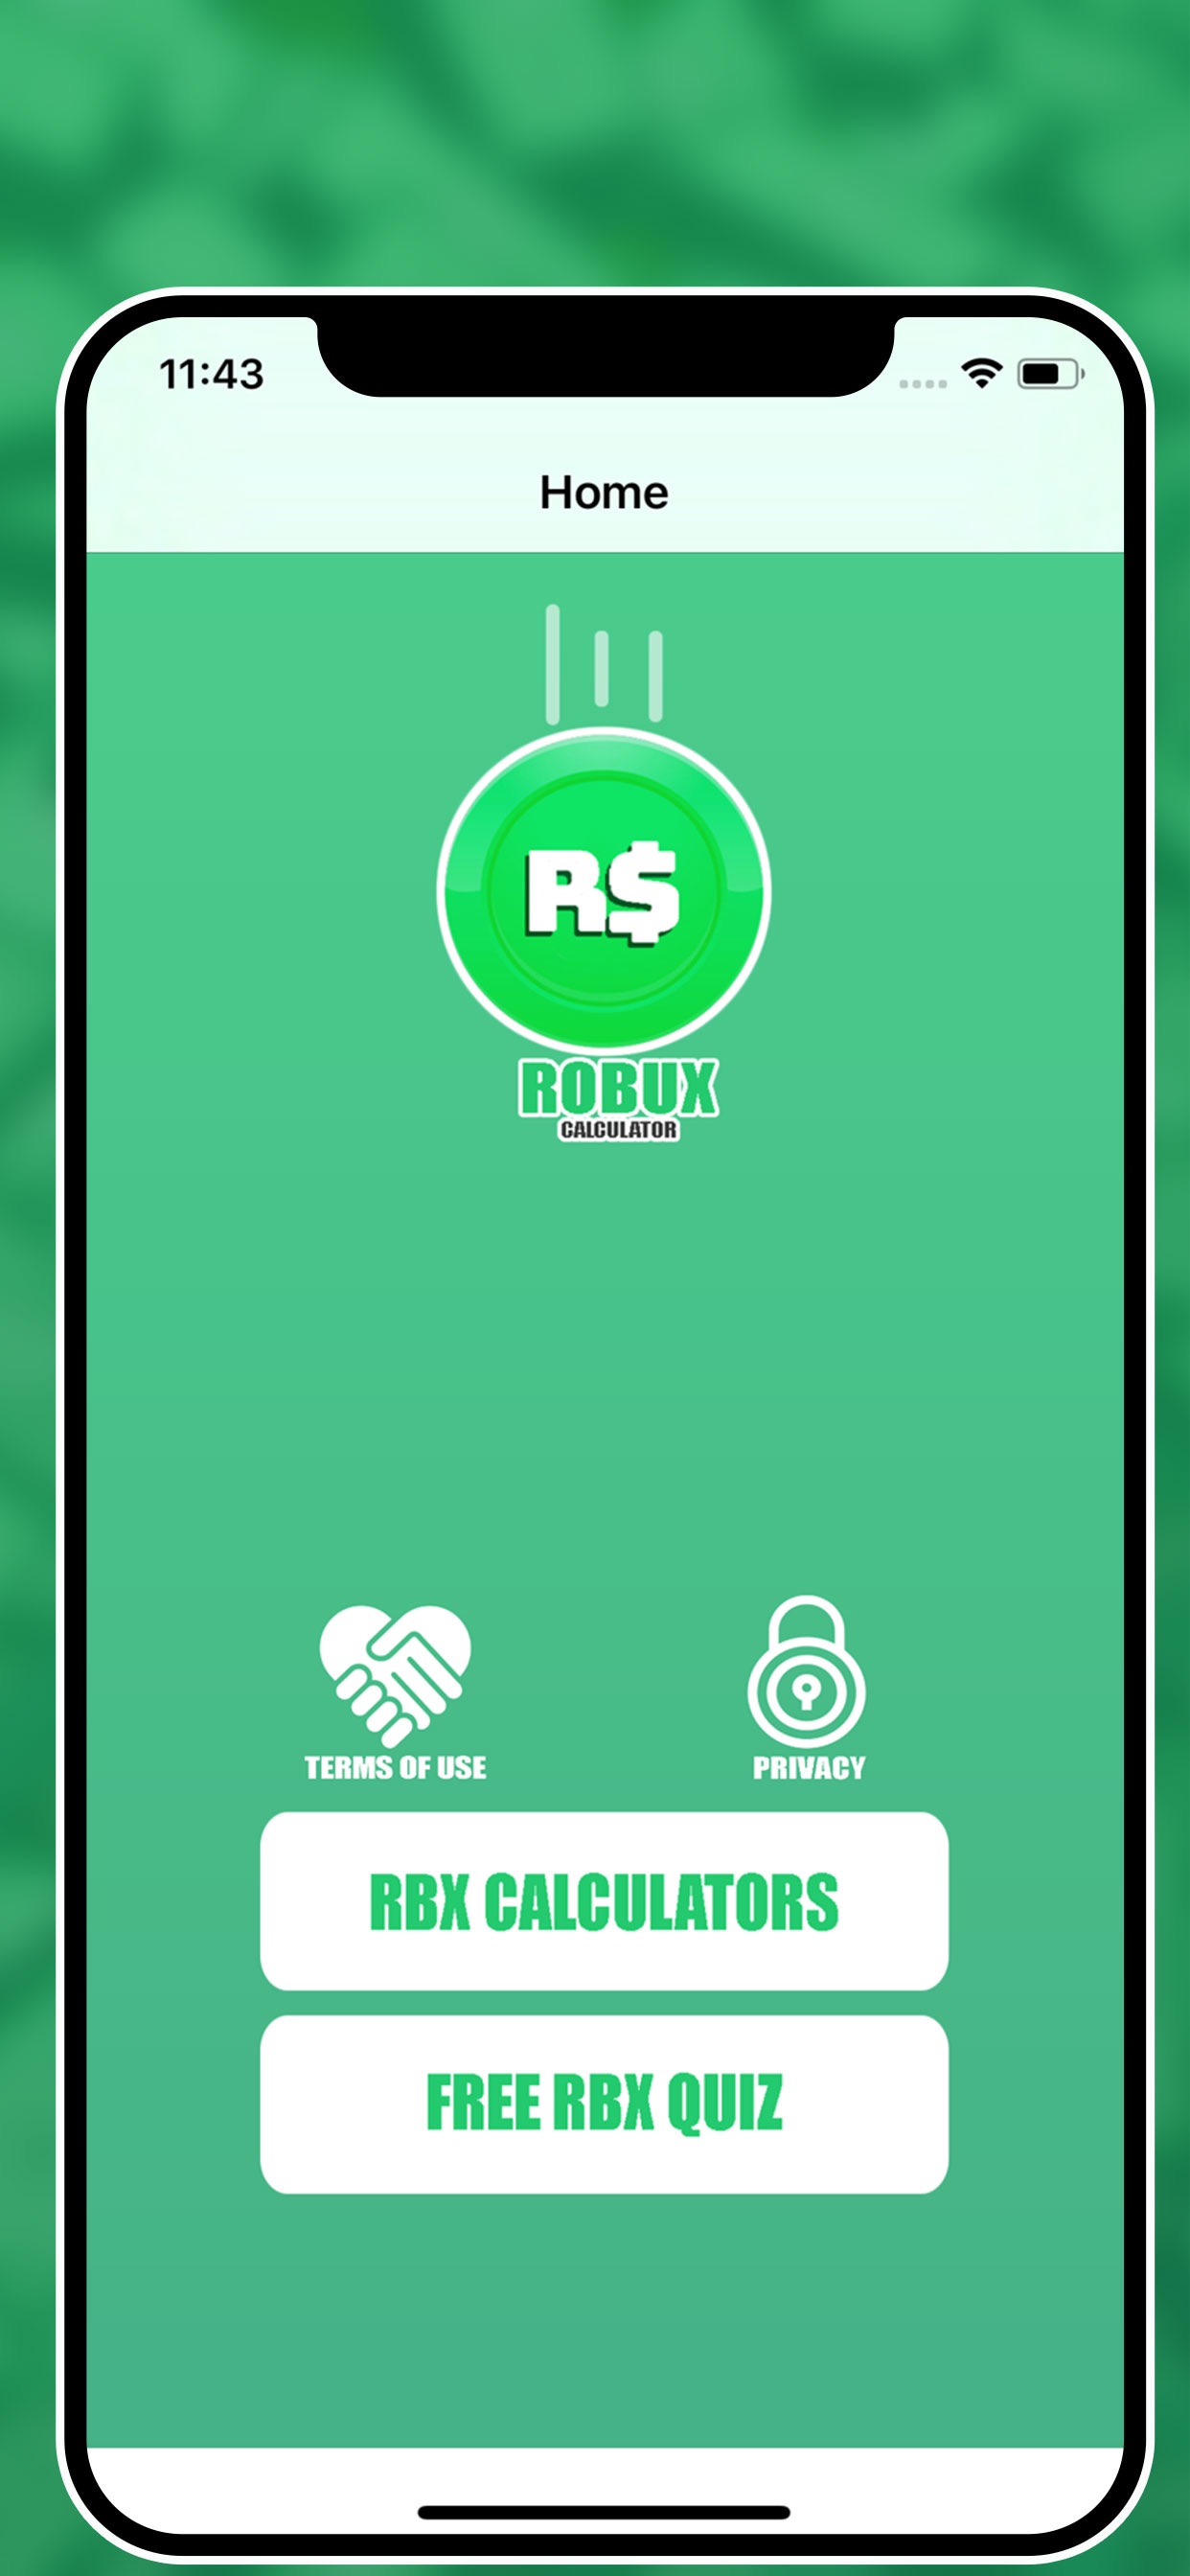 Robux Calculator For Rblox App Store Review Aso Revenue Downloads Appfollow - free roblox builders club trial